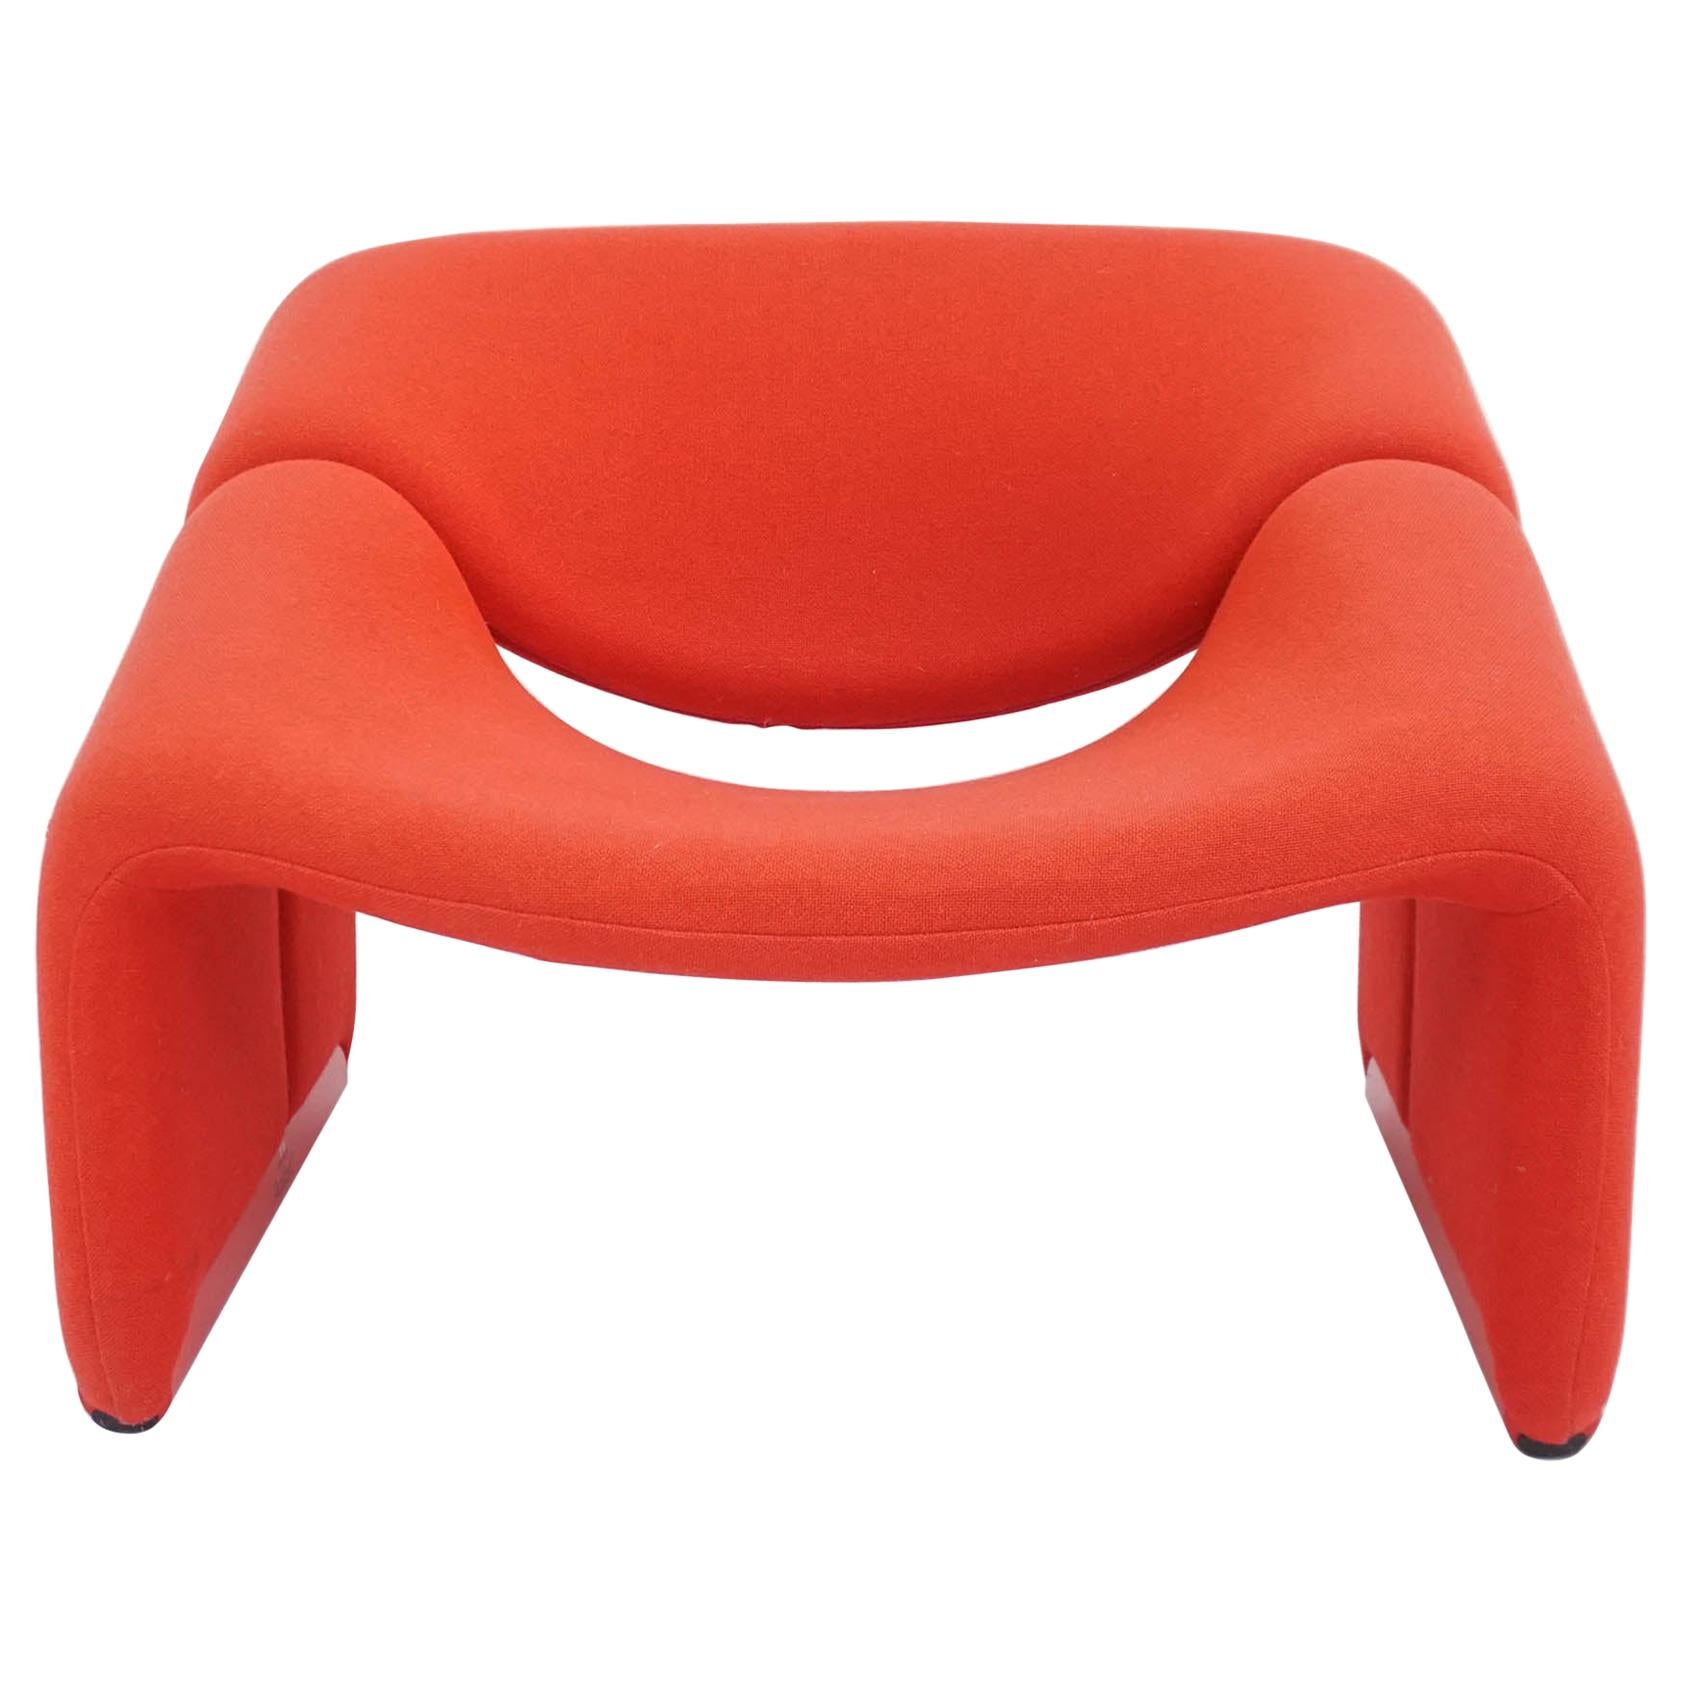 Pierre Paulin Iconic Space Age Power Red Armchair Mod. Groovy, 1973 Artifort